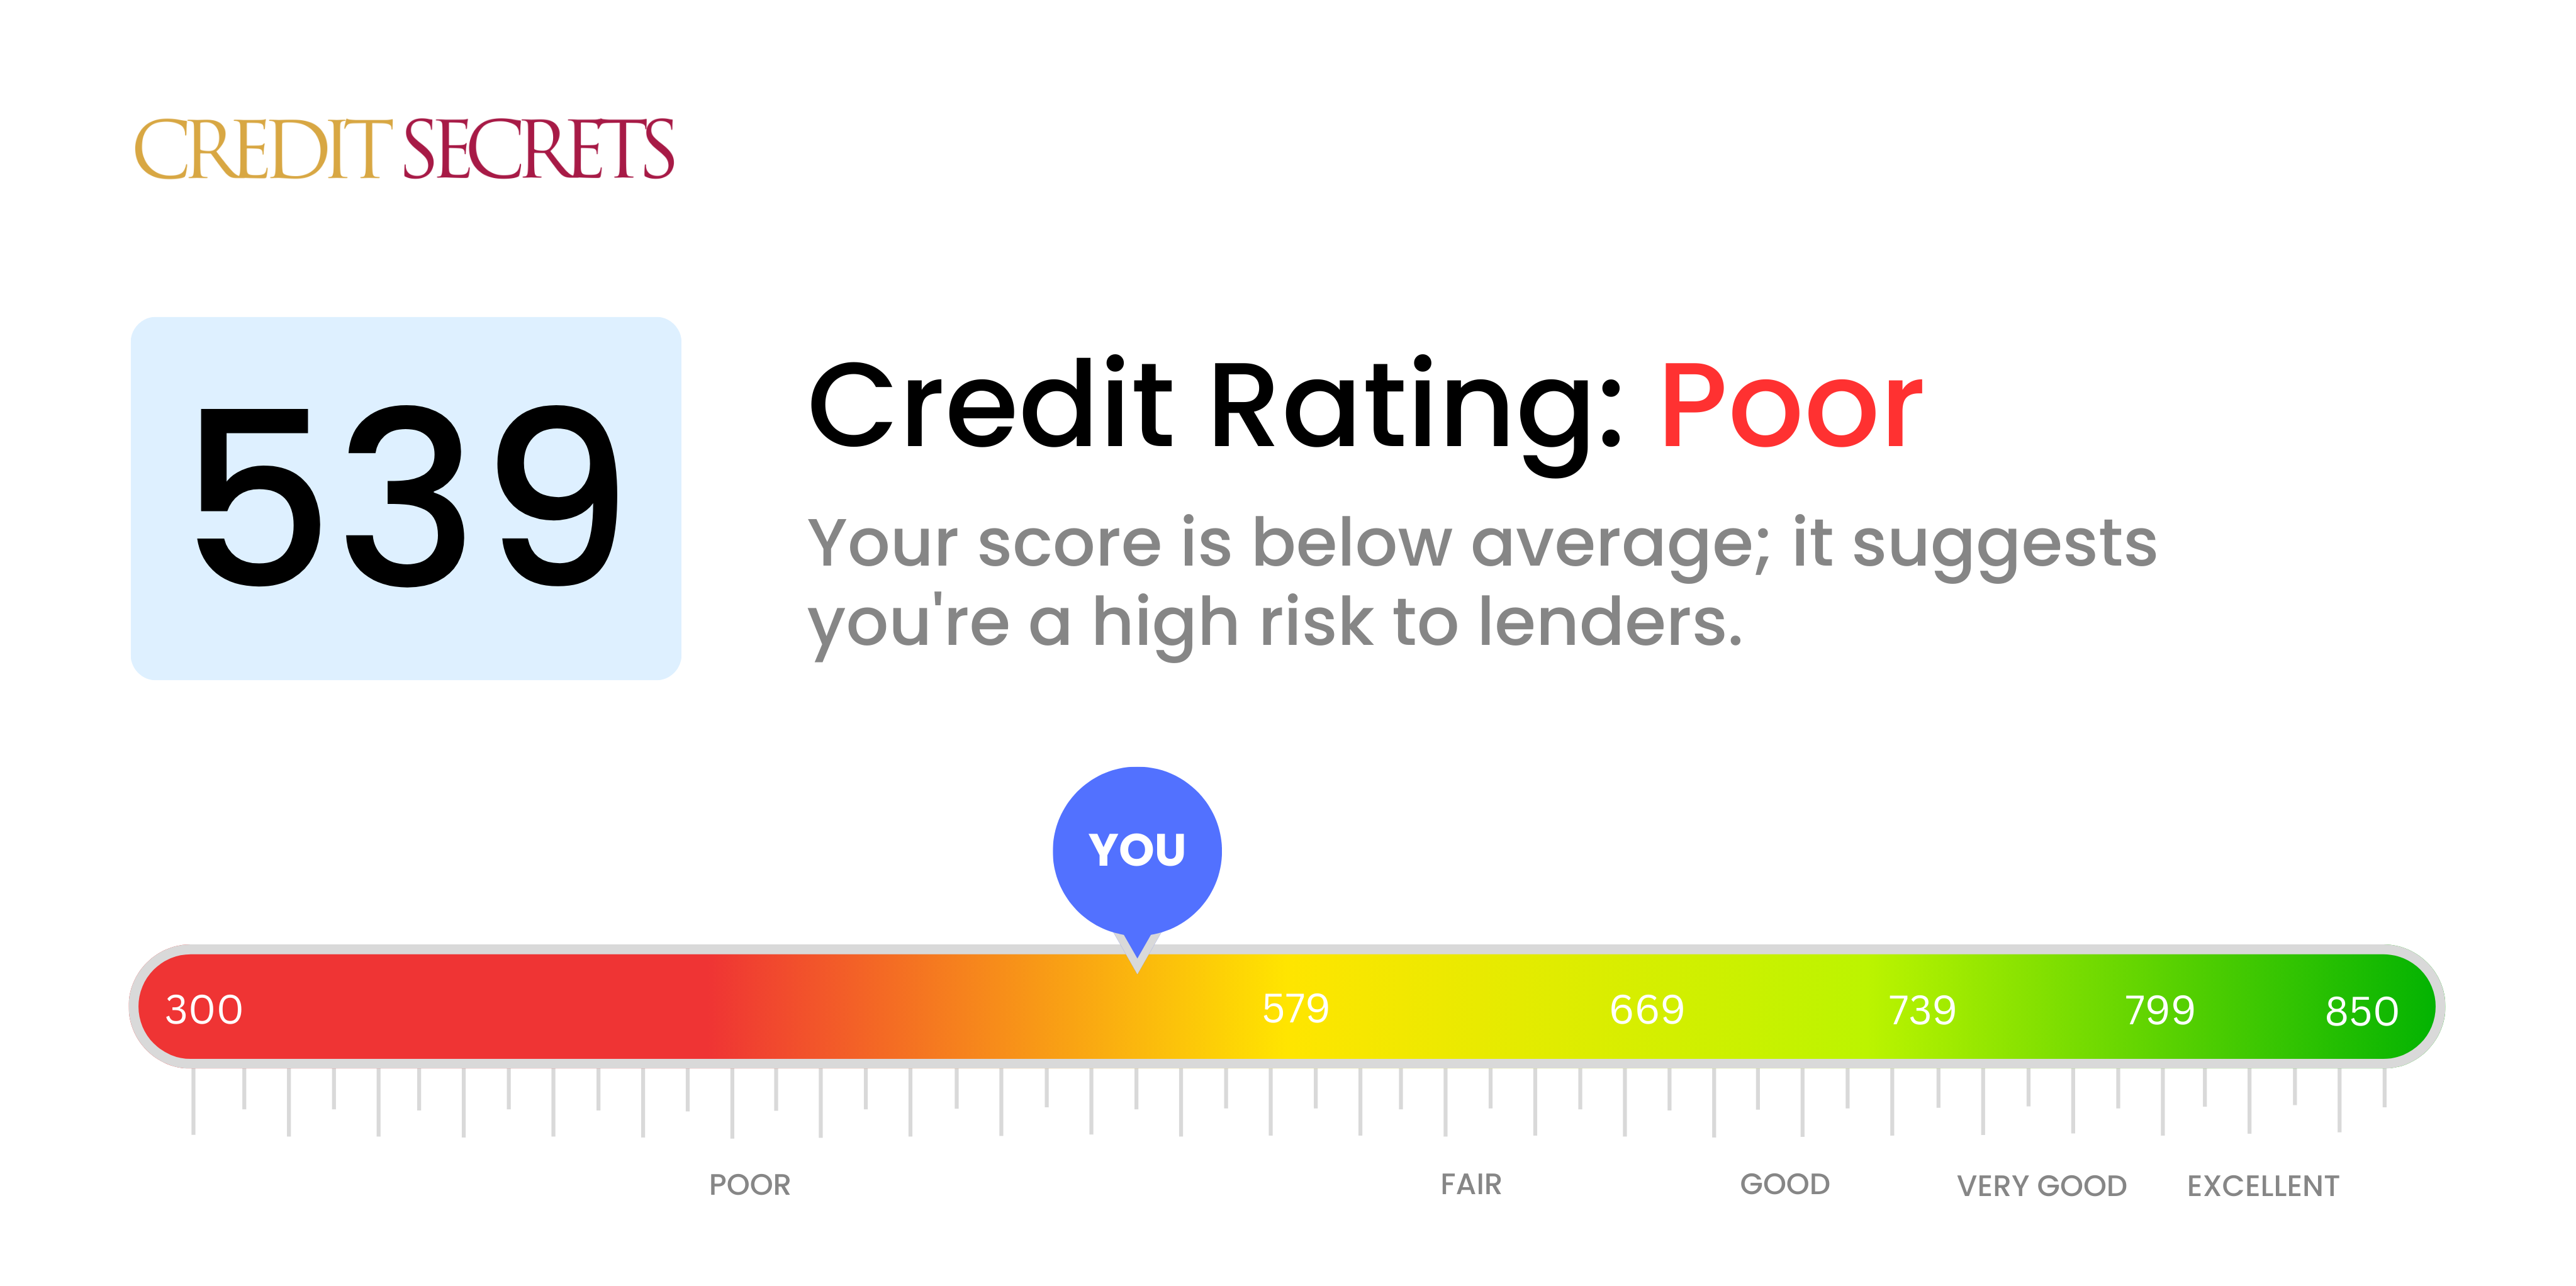 Is 539 a good credit score?